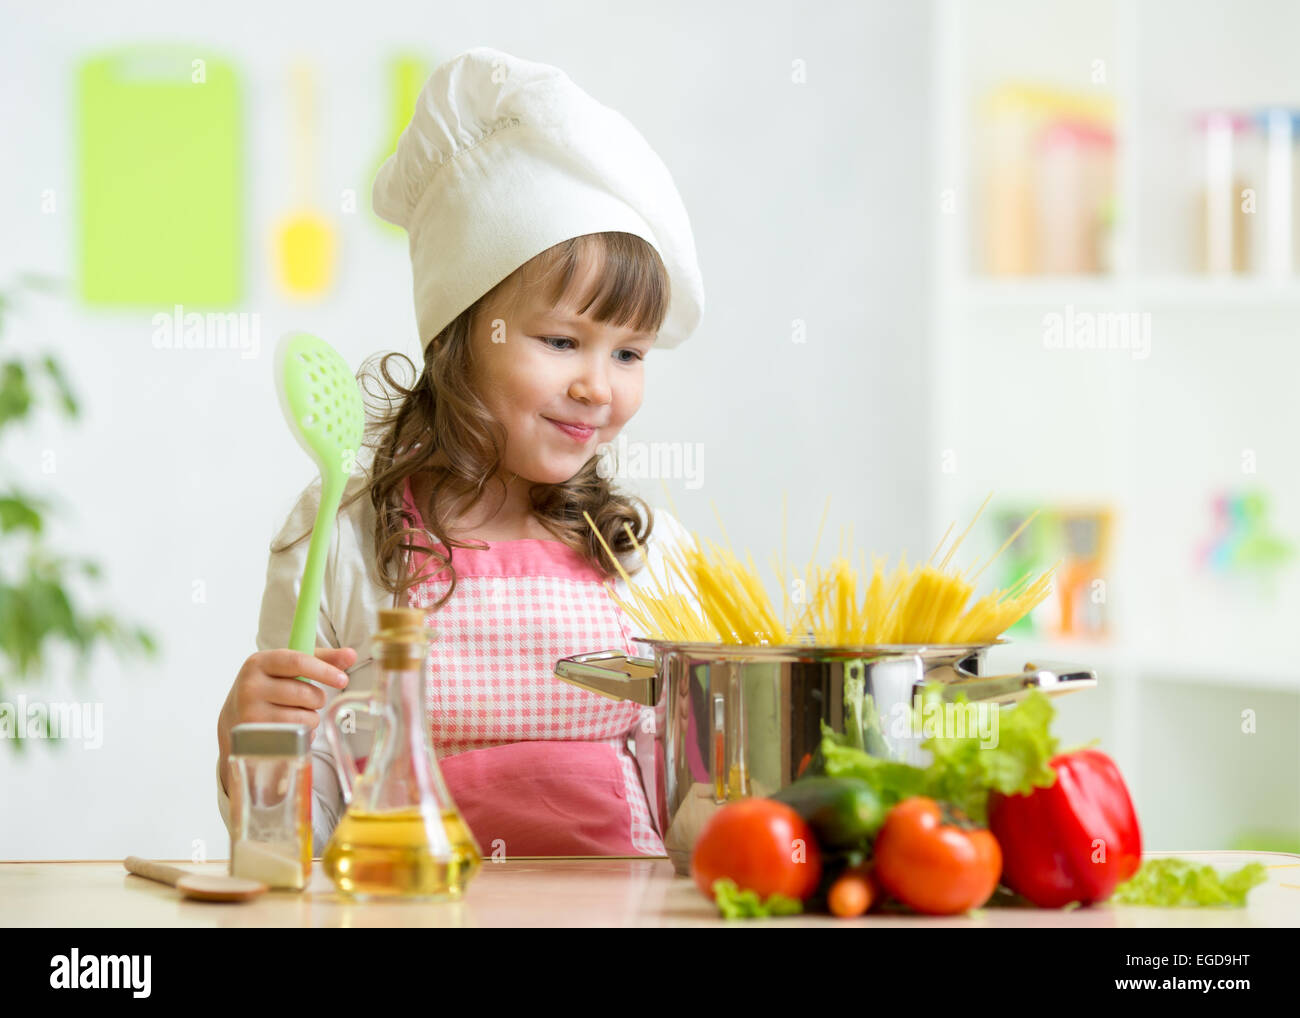 Cook kid makes healthy vegetables meal in the kitchen Stock Photo